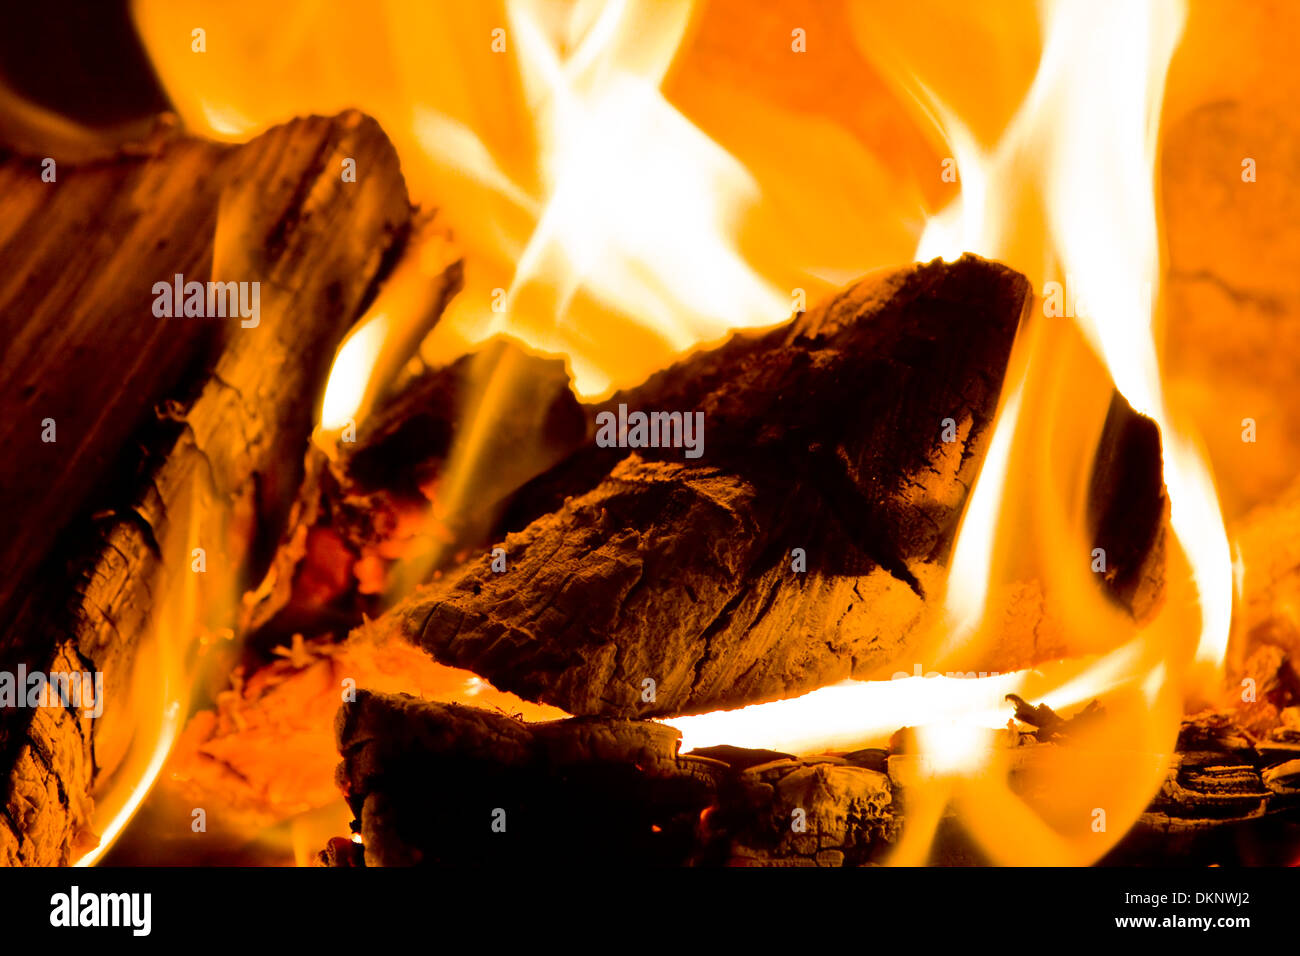 A close up of logs burning on an open fire Stock Photo